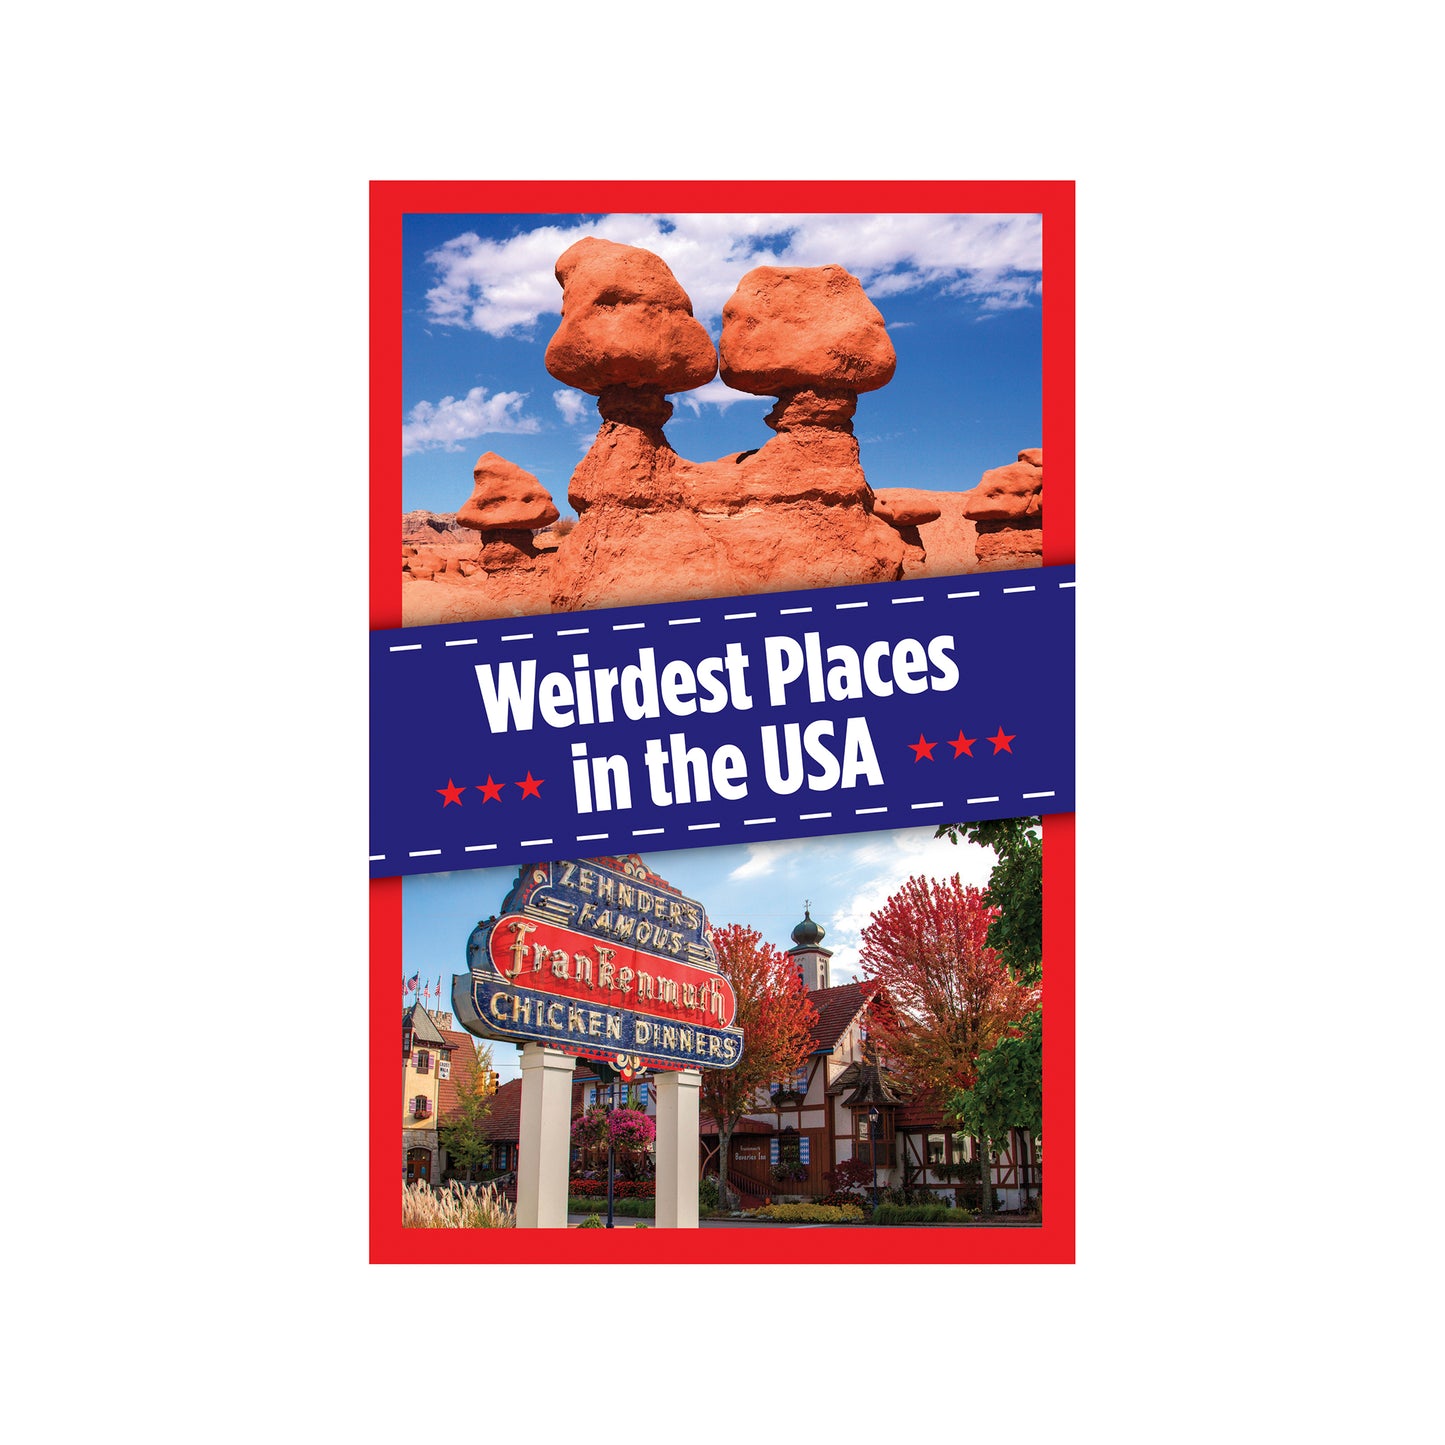 Weirdest Places in the USA